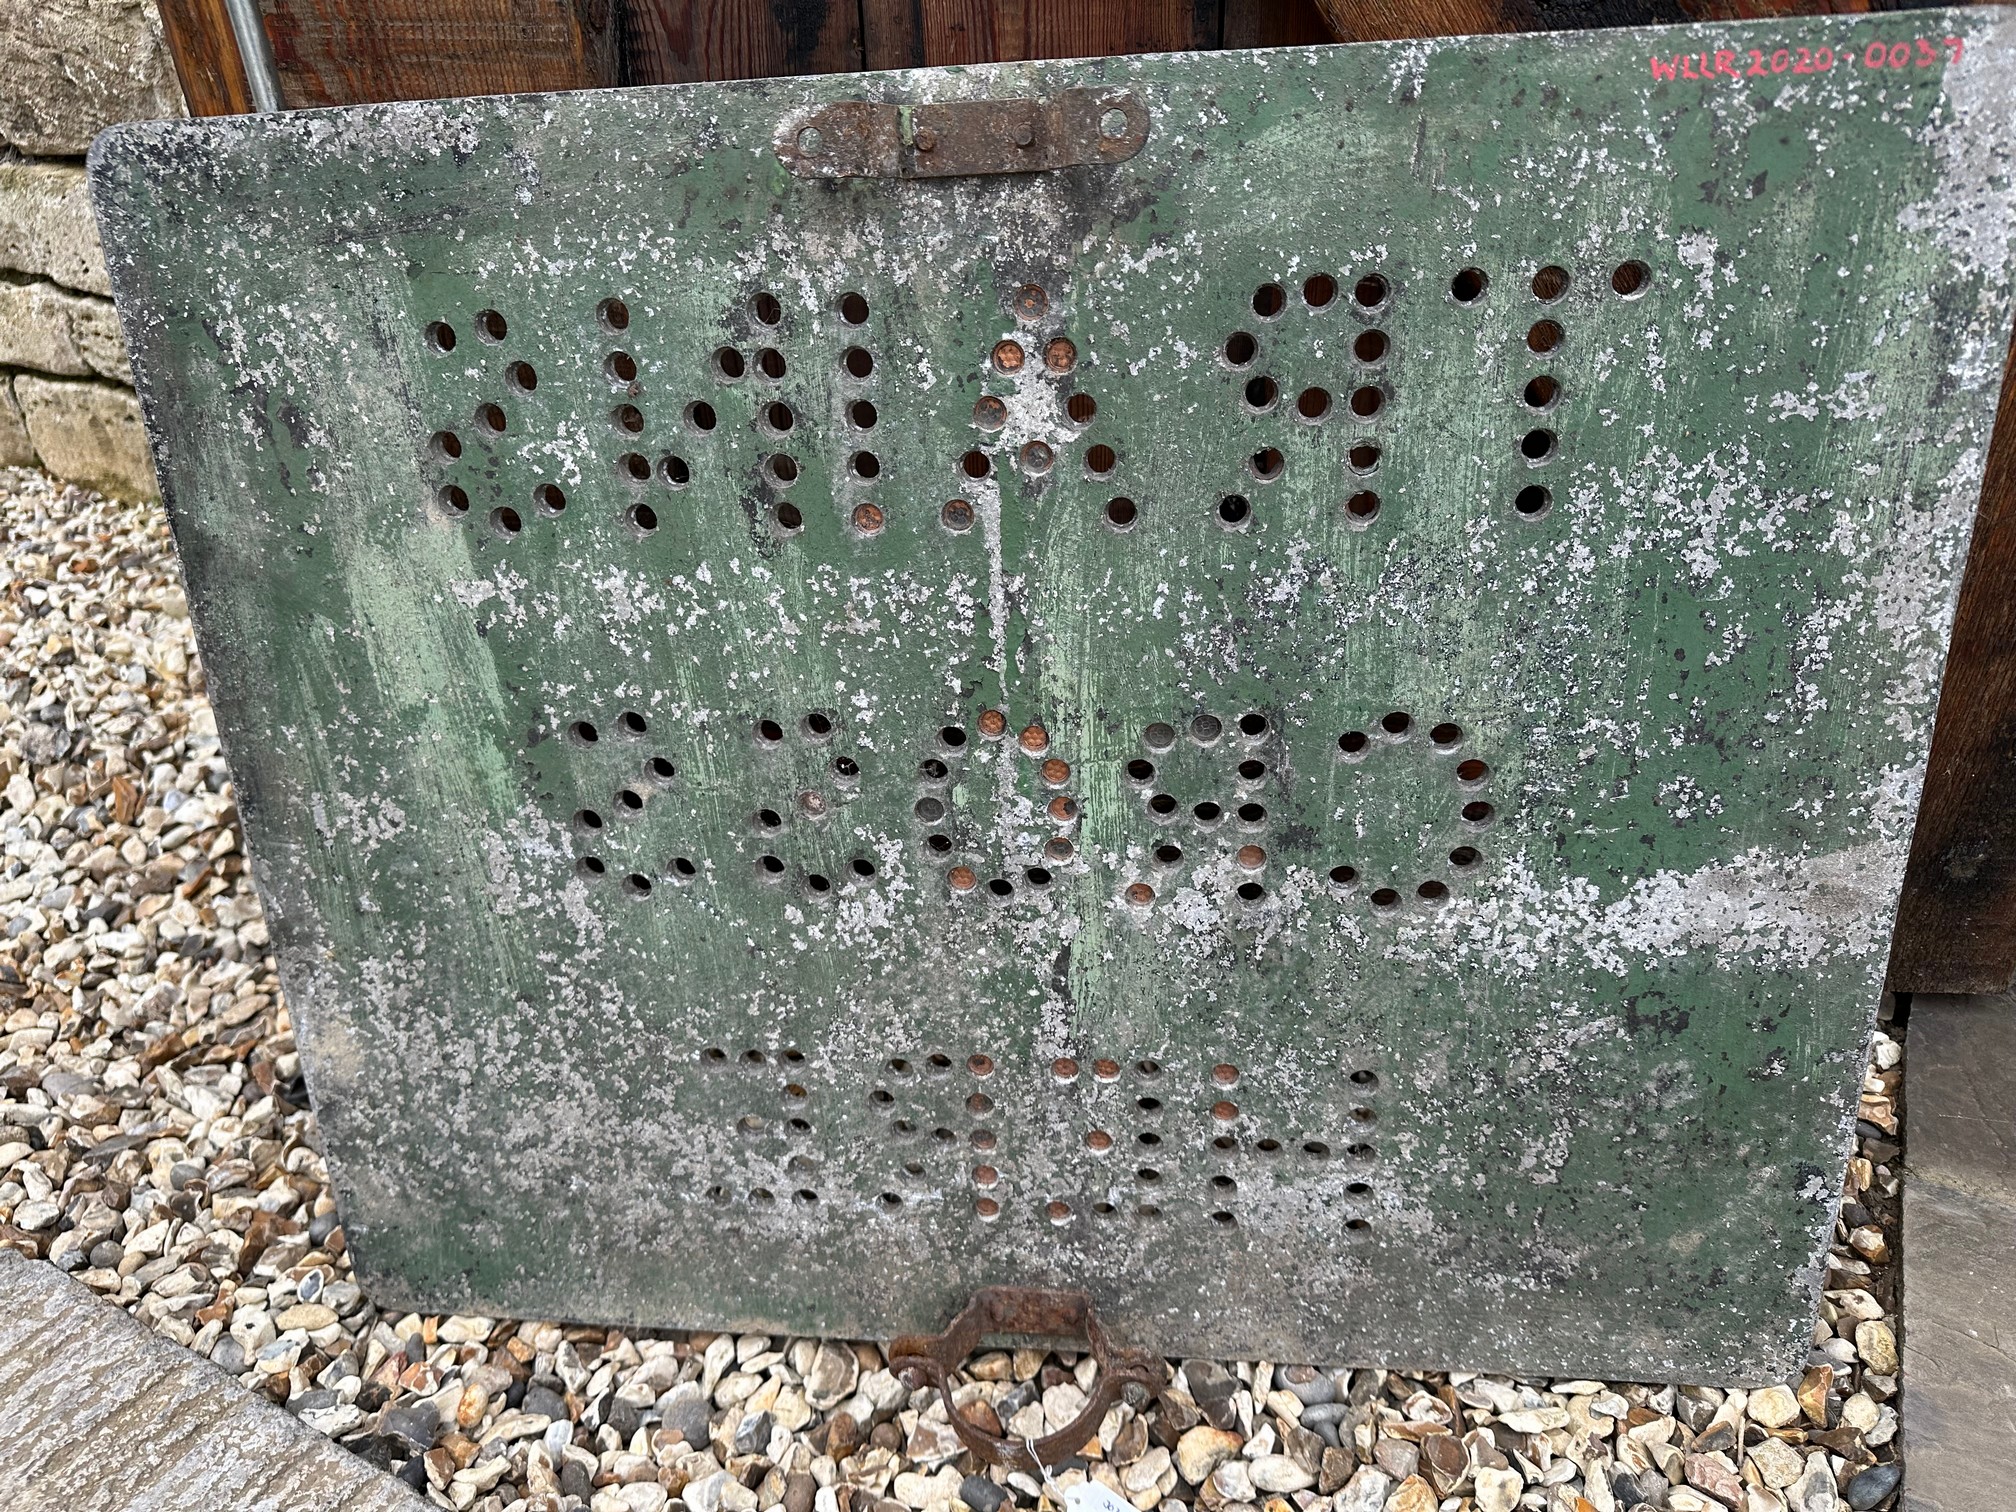 Trains Cross Here - a cast aluminium road sign with pole mounts, some glass reflector beads present, - Image 2 of 7